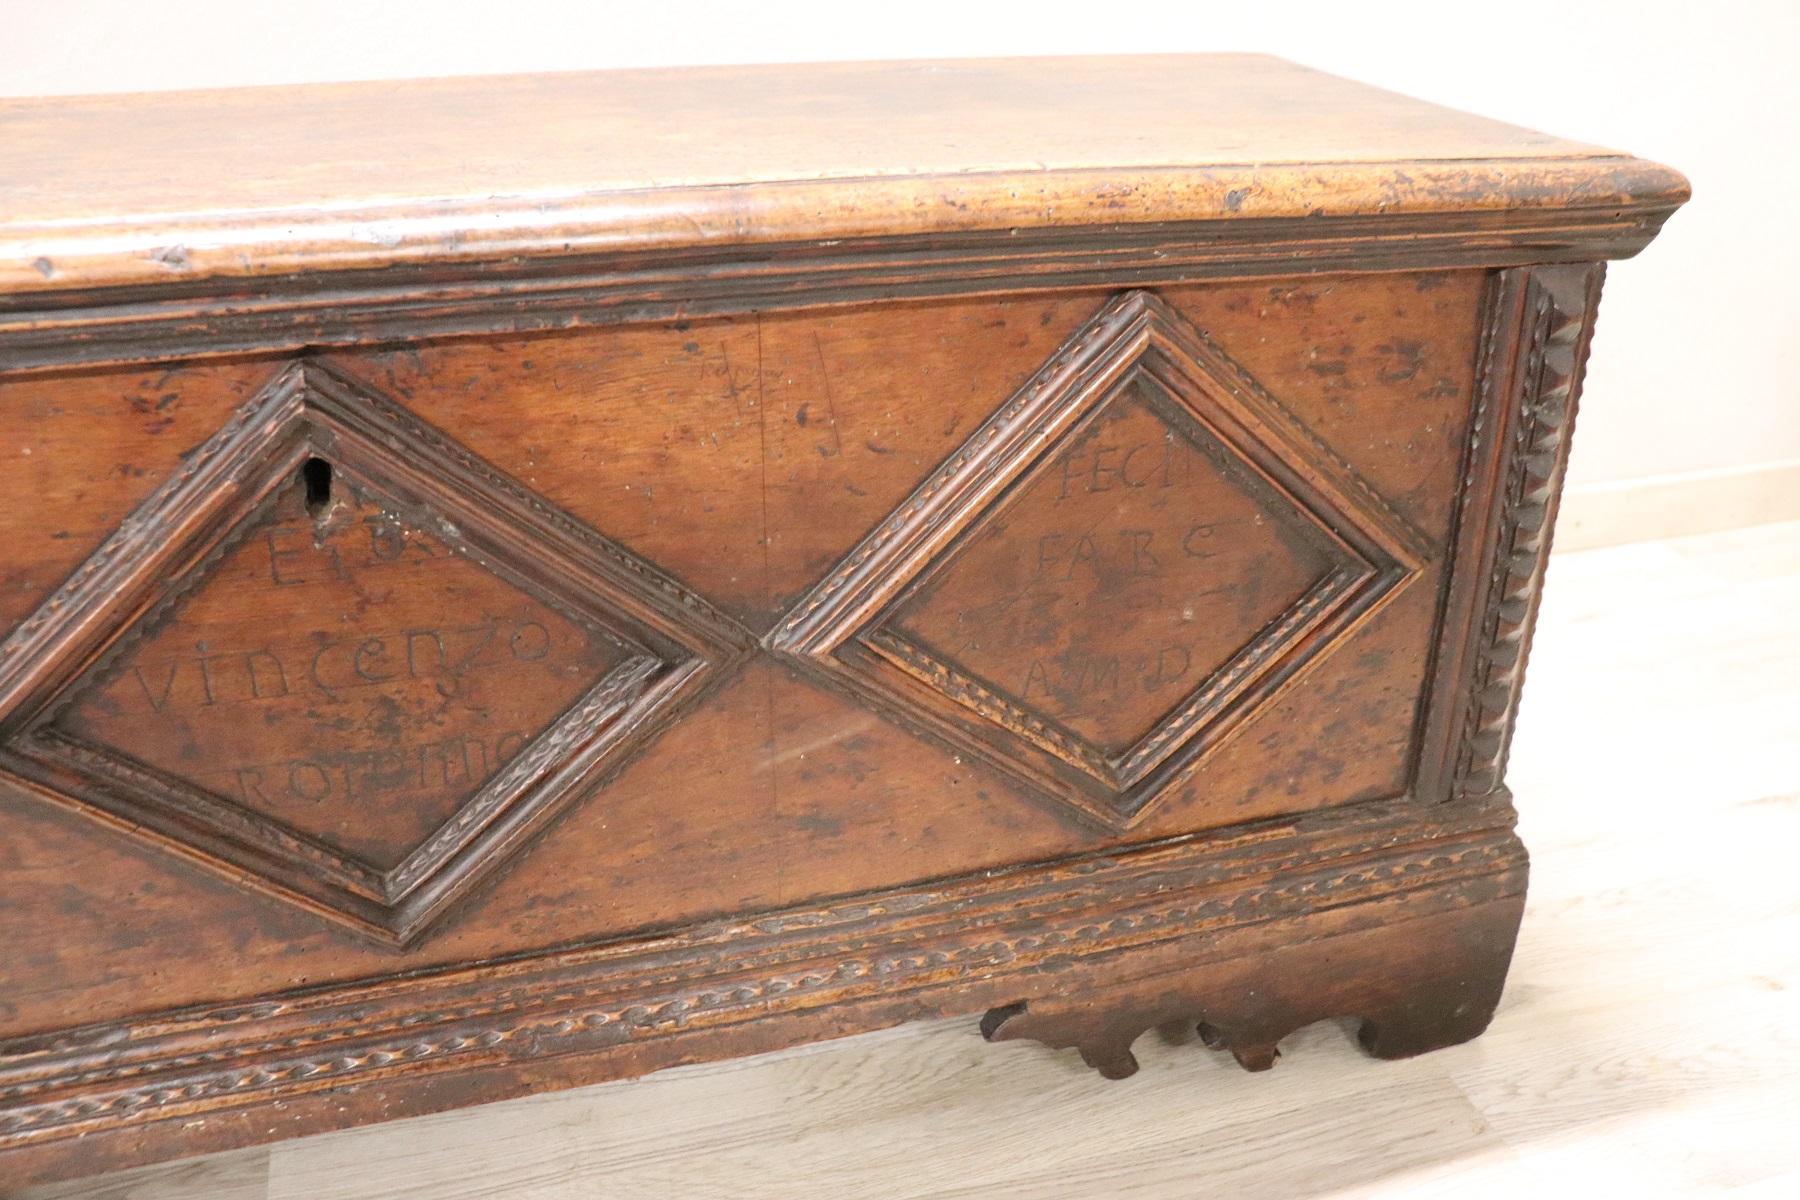 Late 18th Century Italian Solid Walnut Antique Blanket Chest, Date Engraved, 1788